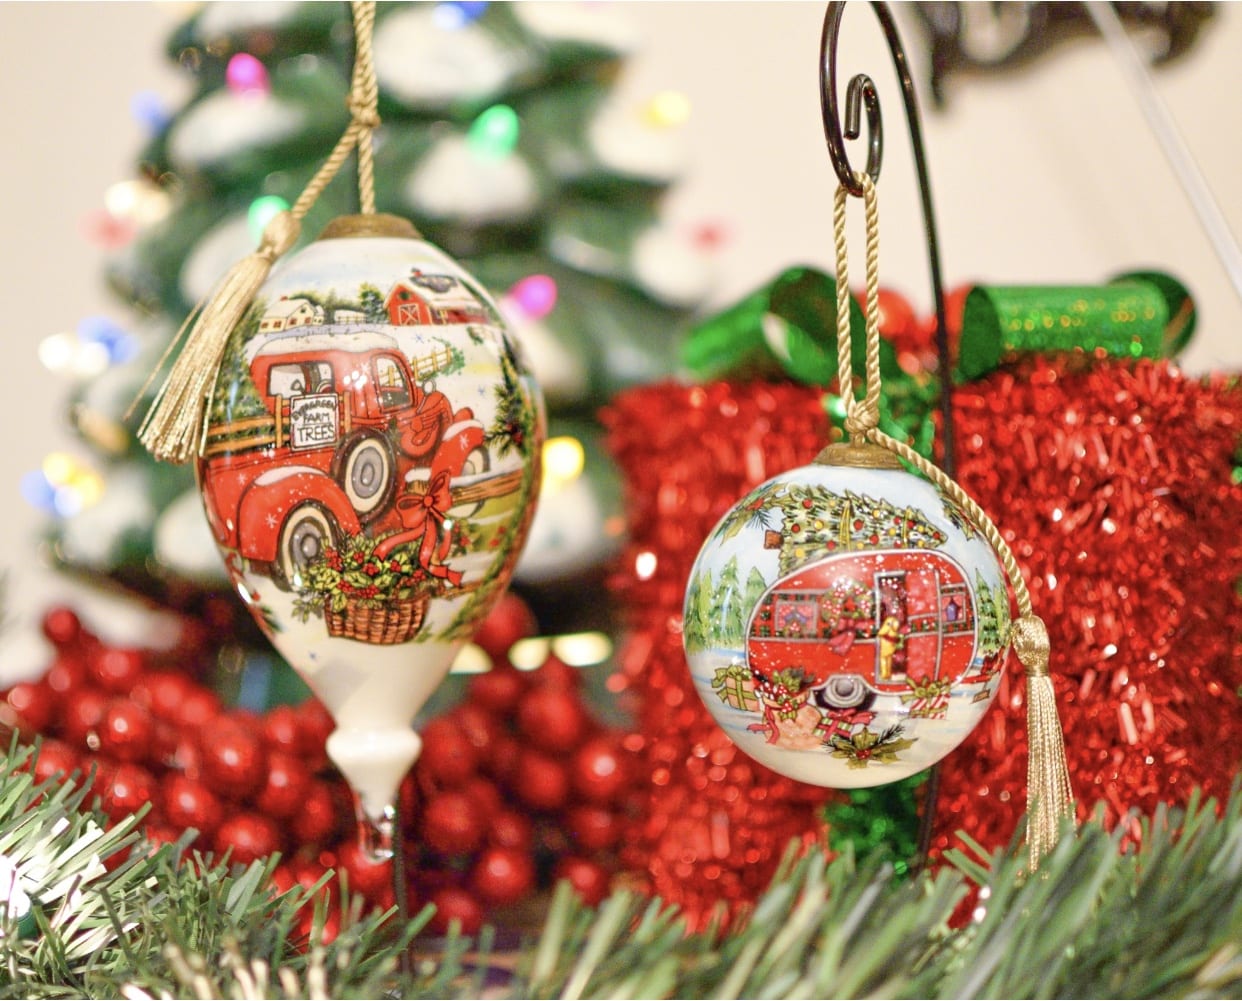 Unique Personalized Christmas Ornaments! - Life of a Cherry Wife